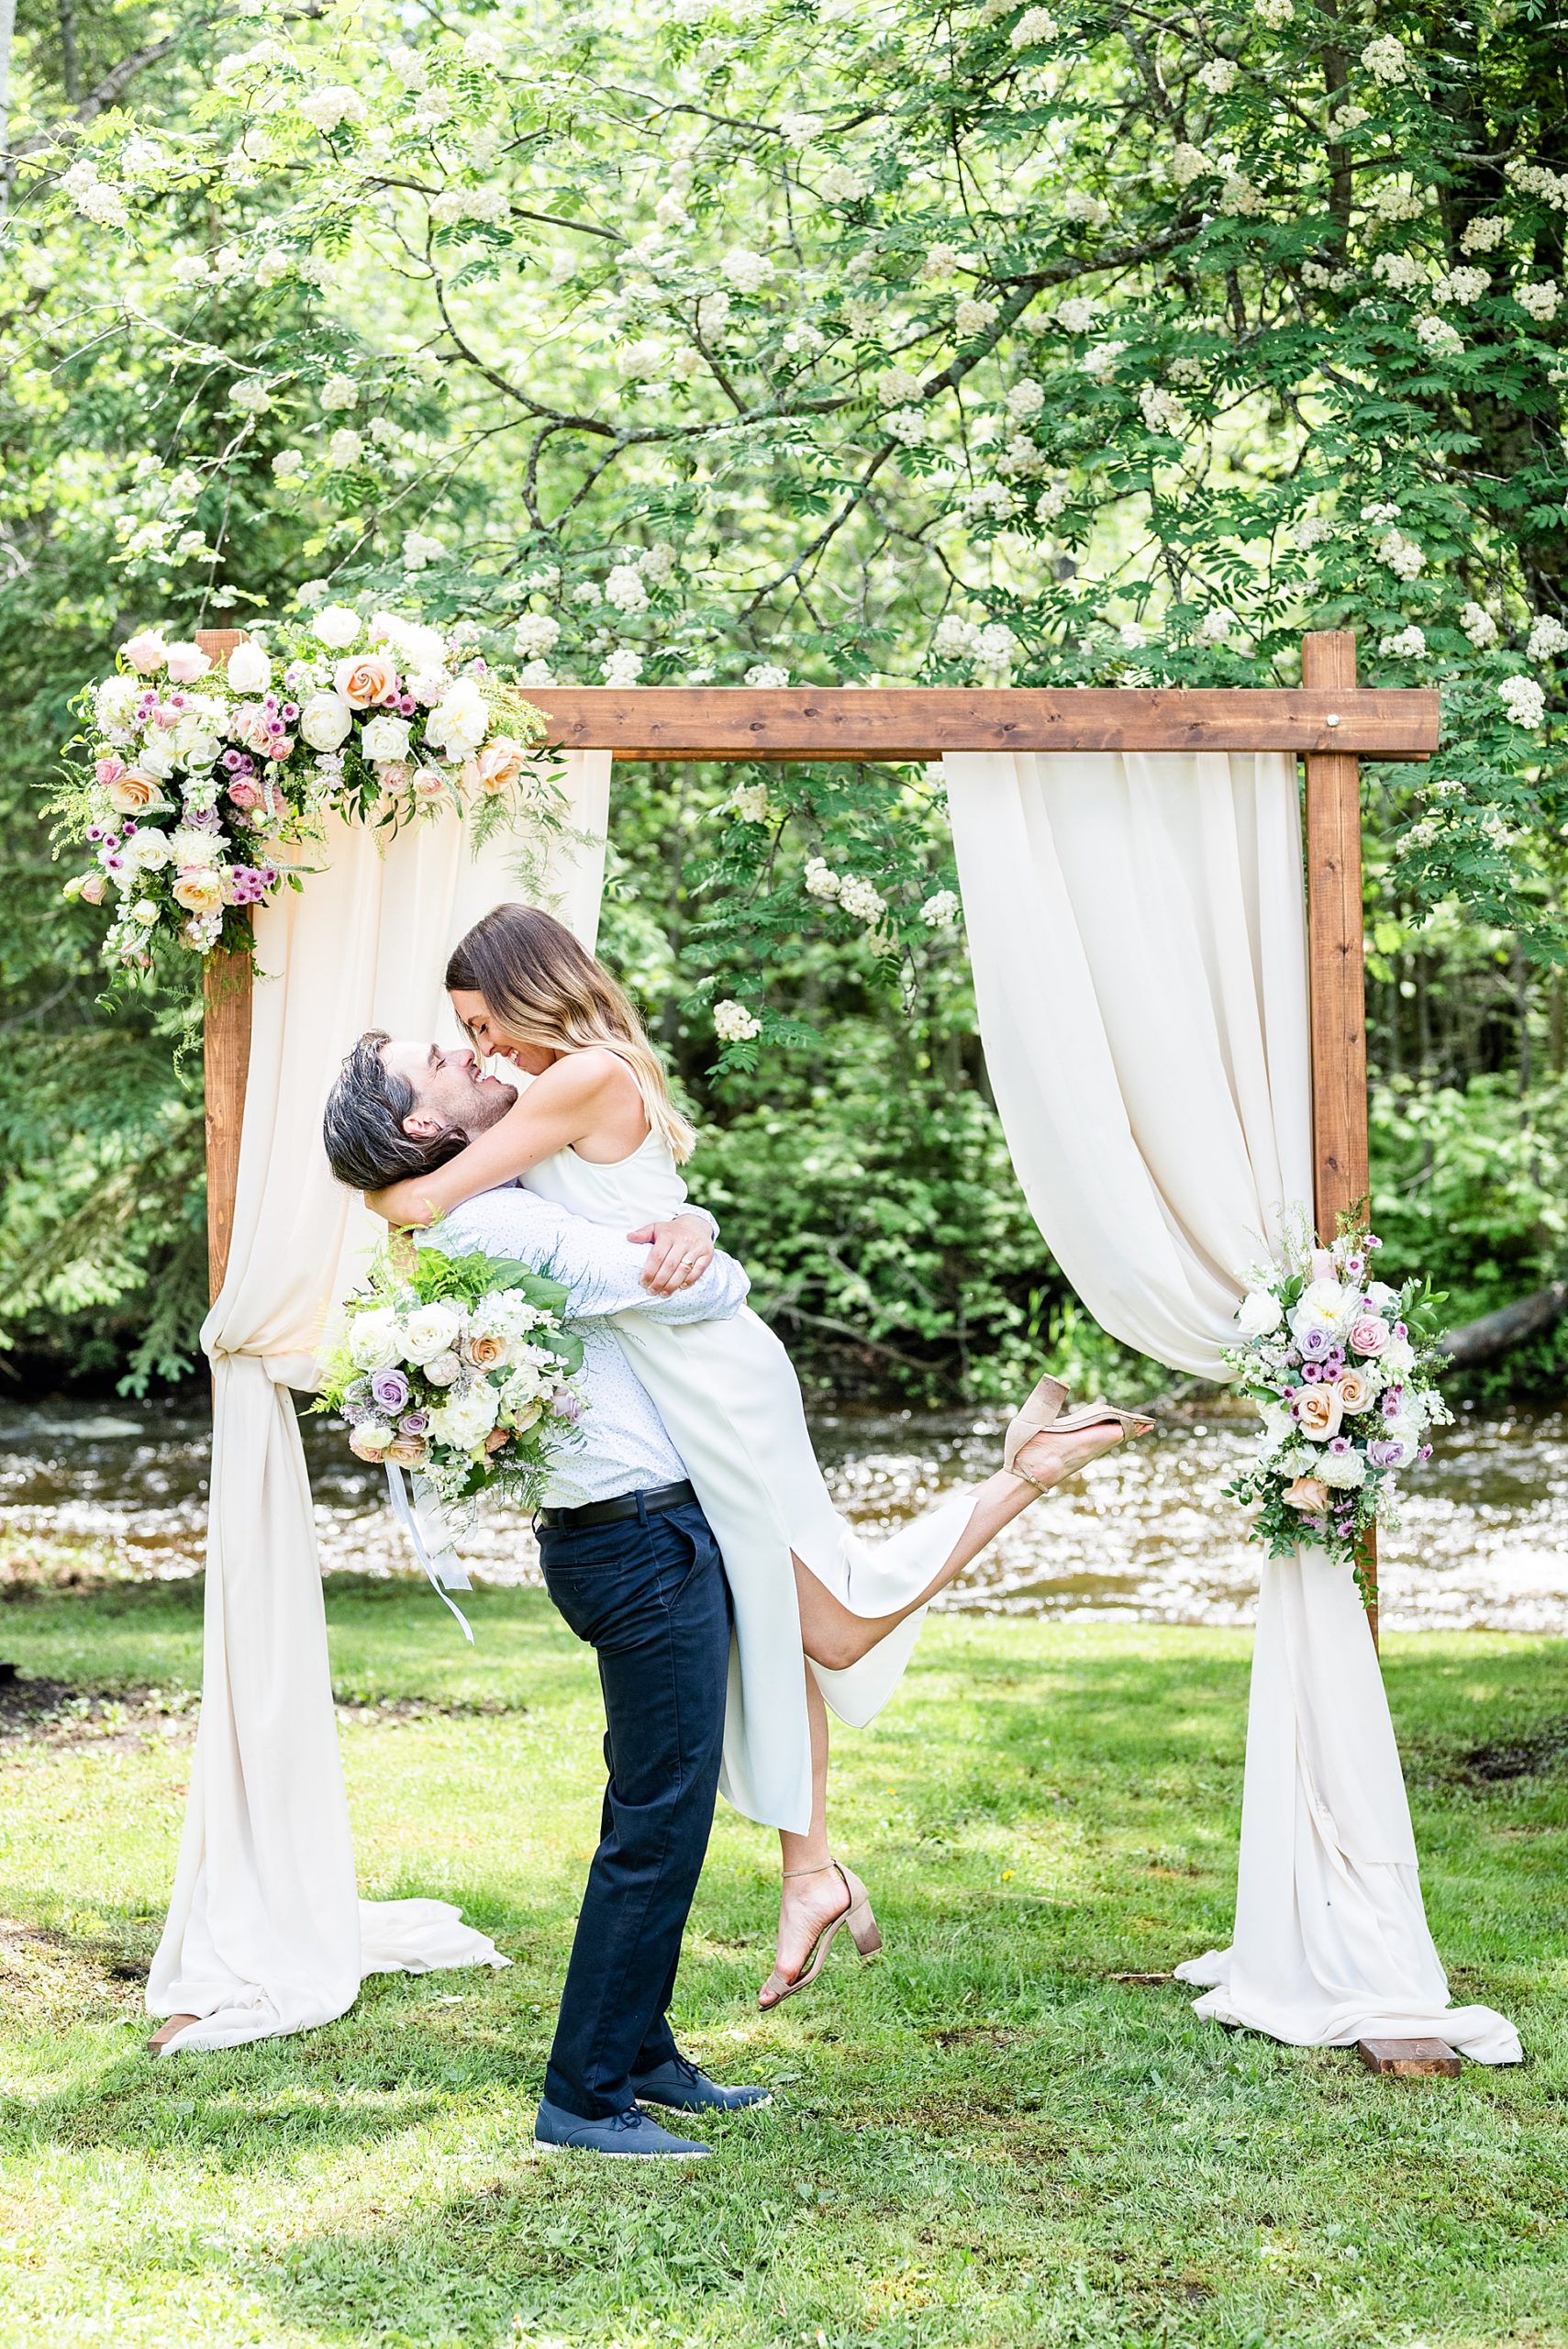 Groom lifts bride in a kiss at the alter covered in flowers